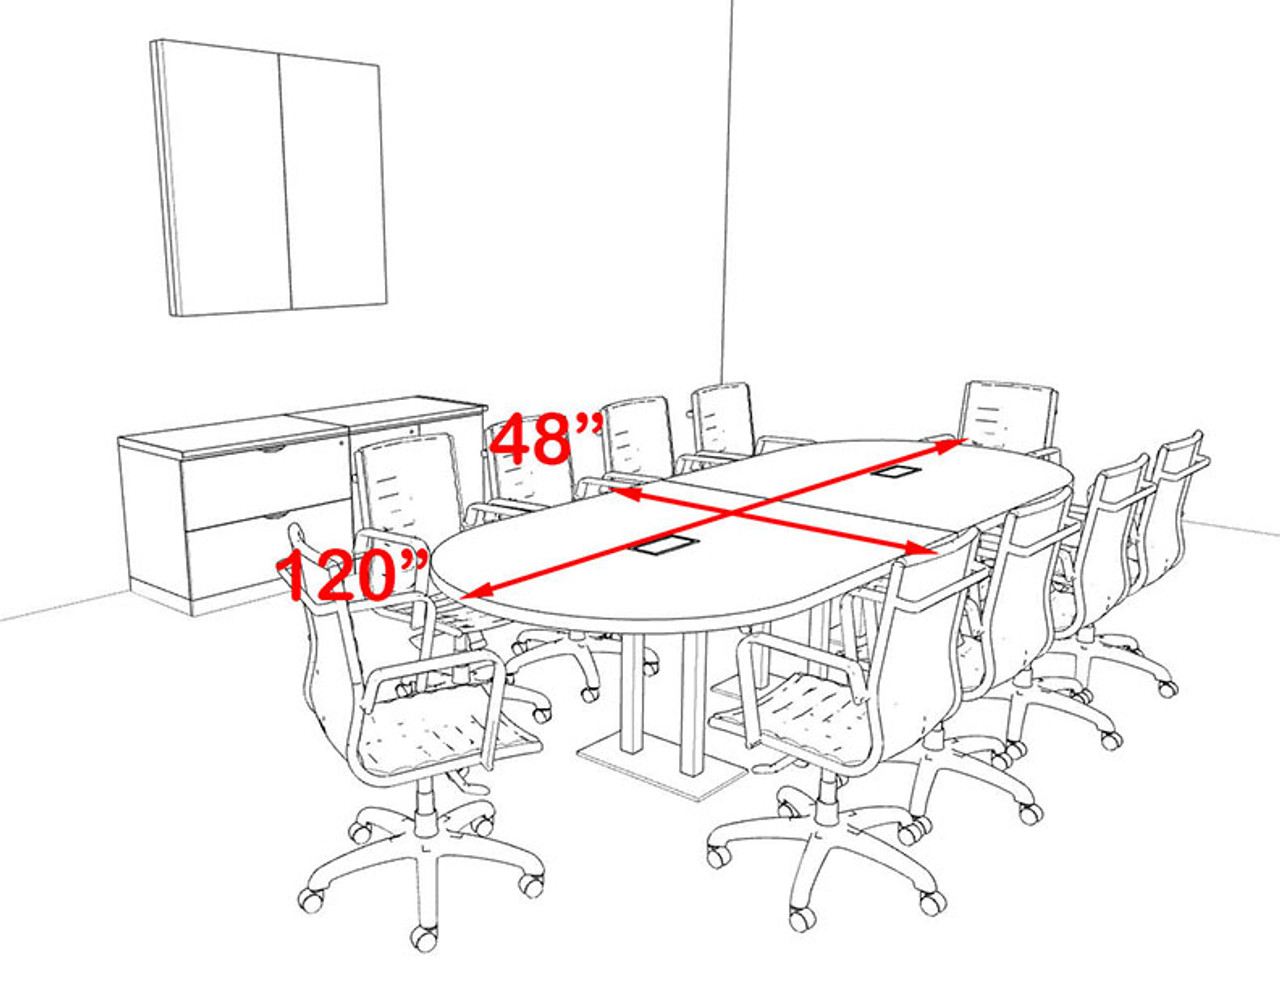 Modern Racetrack Steel Leg 10' Feet Conference Table, #OF-CON-CM6